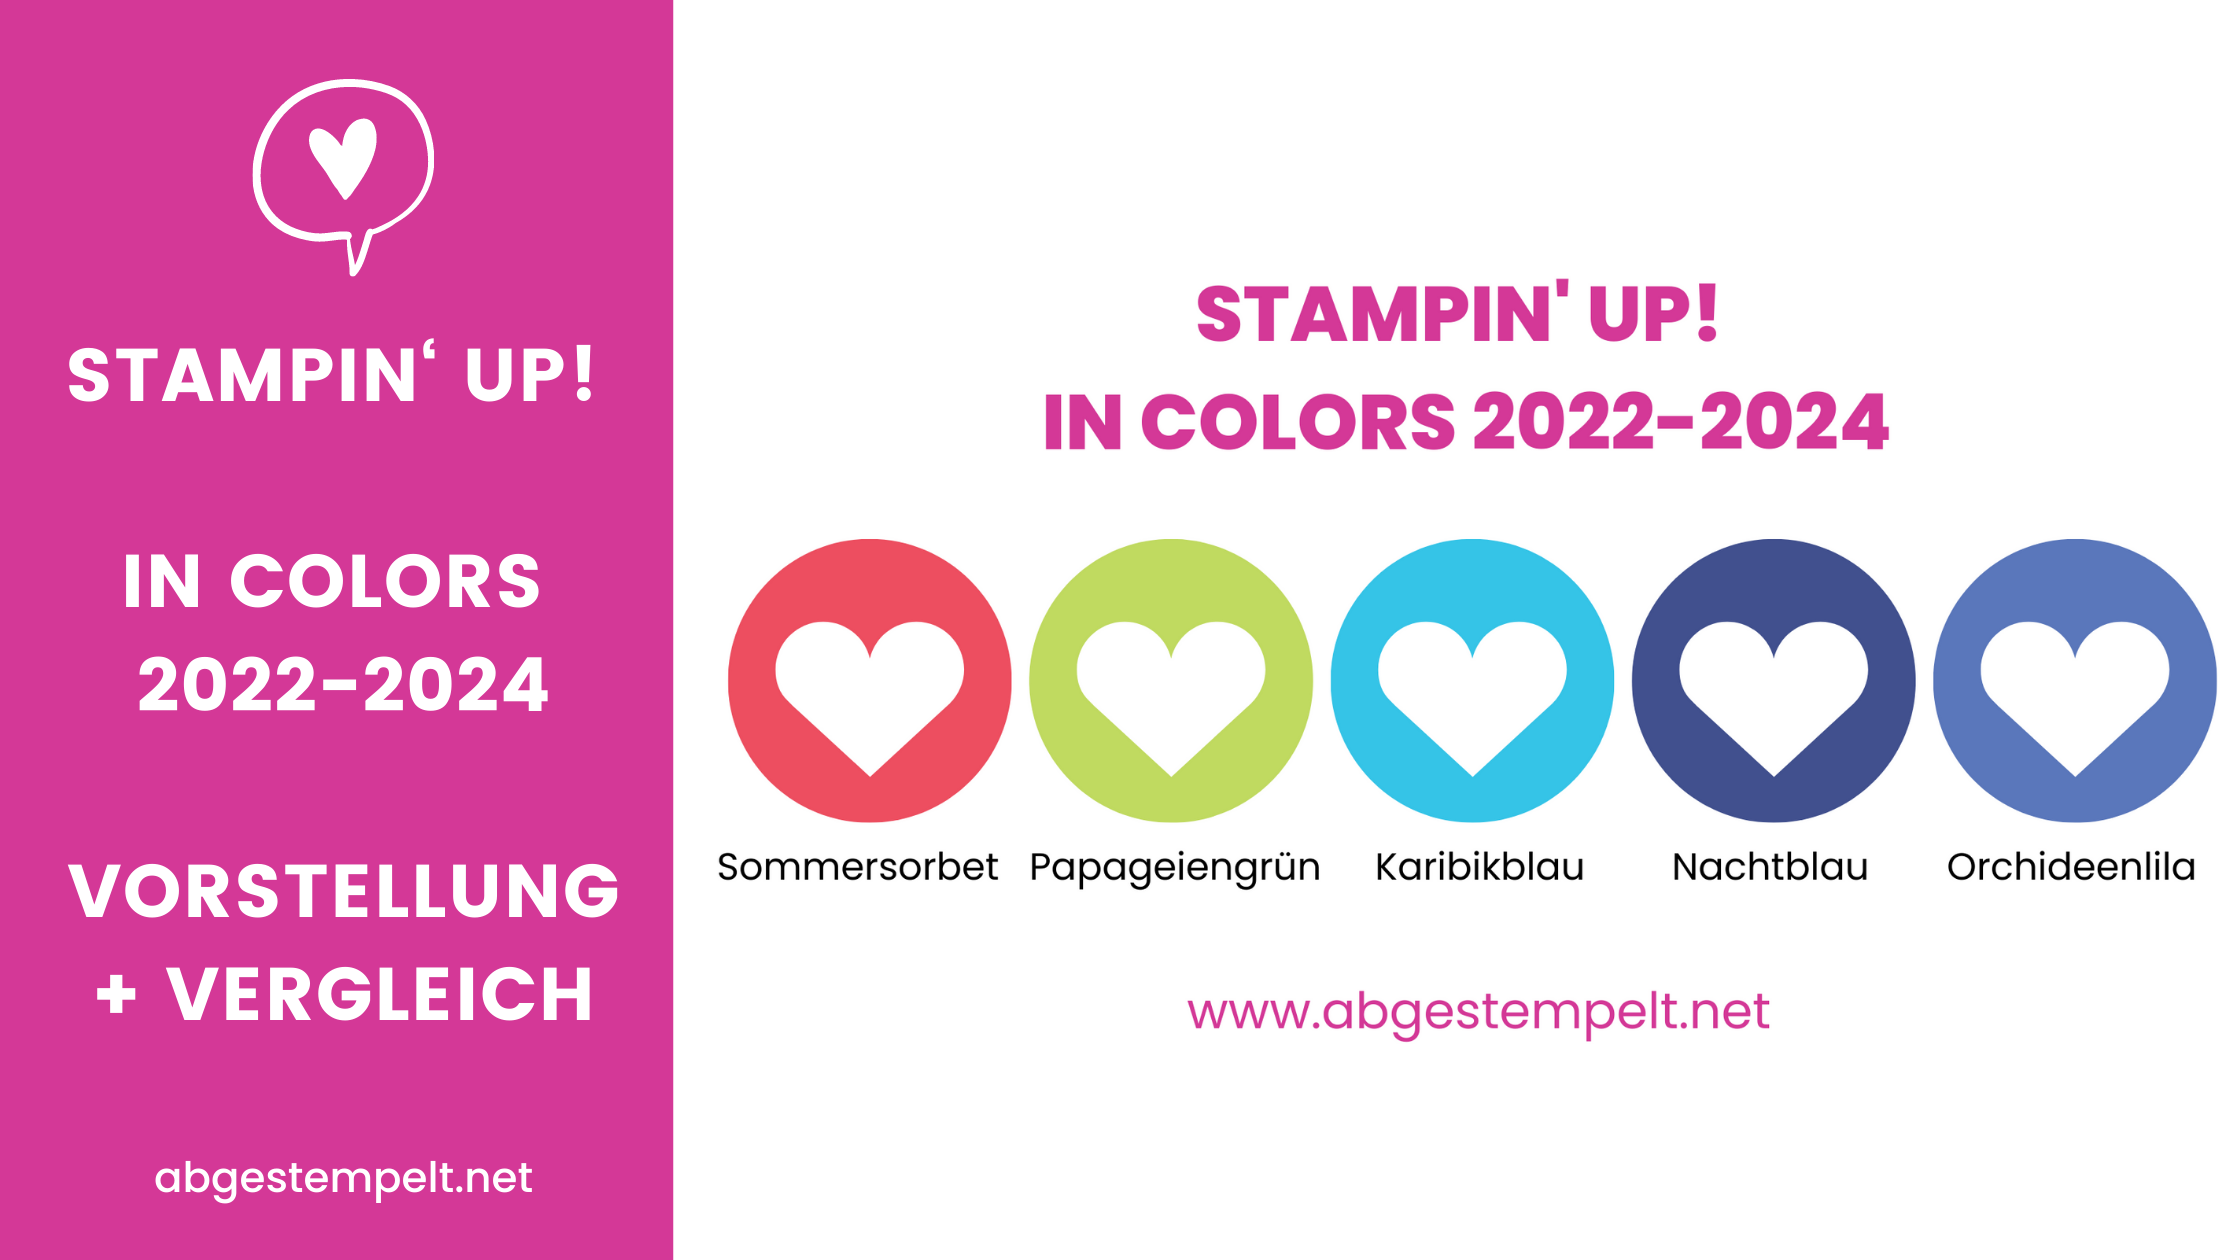 Blogpost Stampin' Up! In Colors 2022-2024 abgestempelt